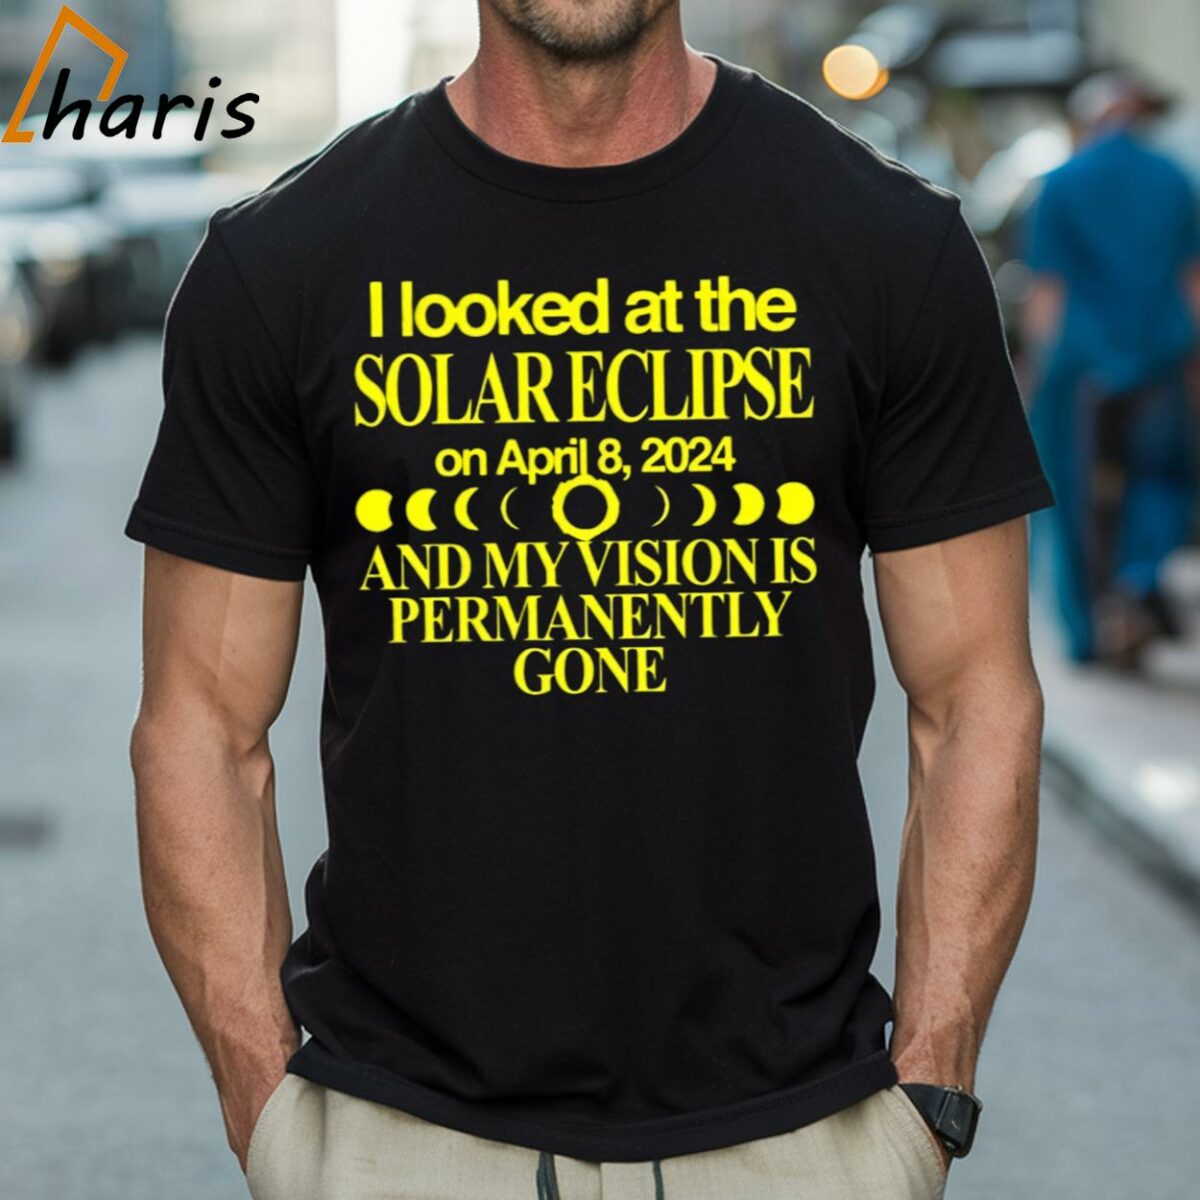 I Looked At The Solar Eclipse On April 8 2024 And My Vision Is Permanently Gone T shirt 1 Shirt